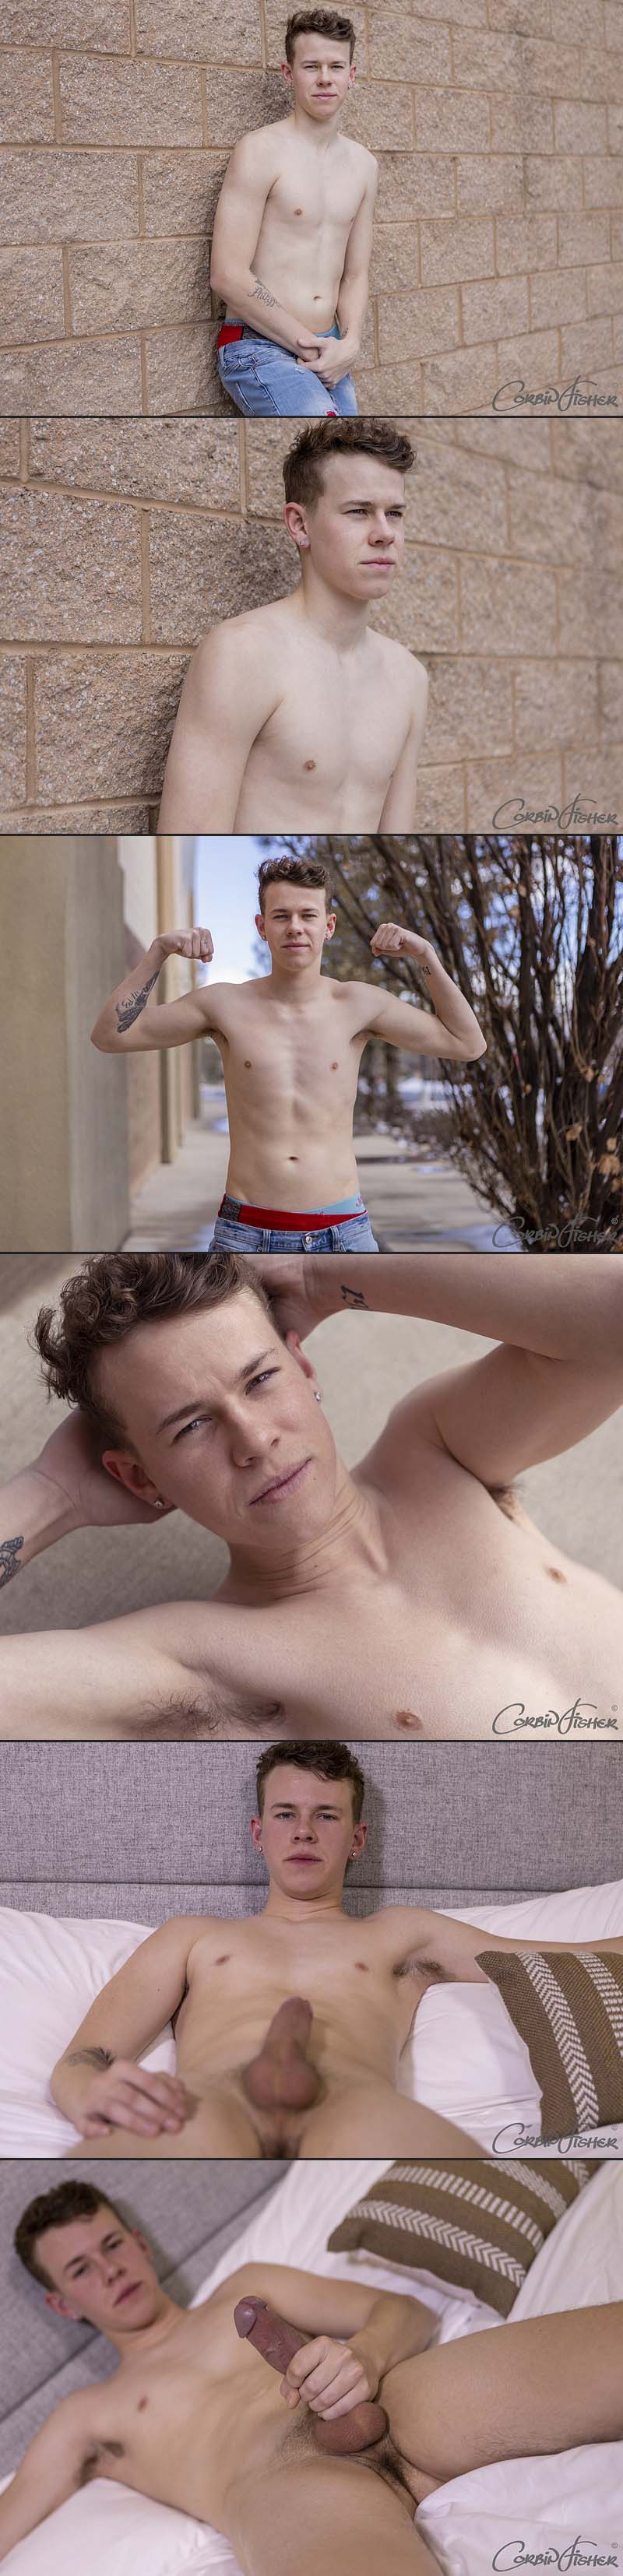 Colby's Cum Makes a Splash at CorbinFisher